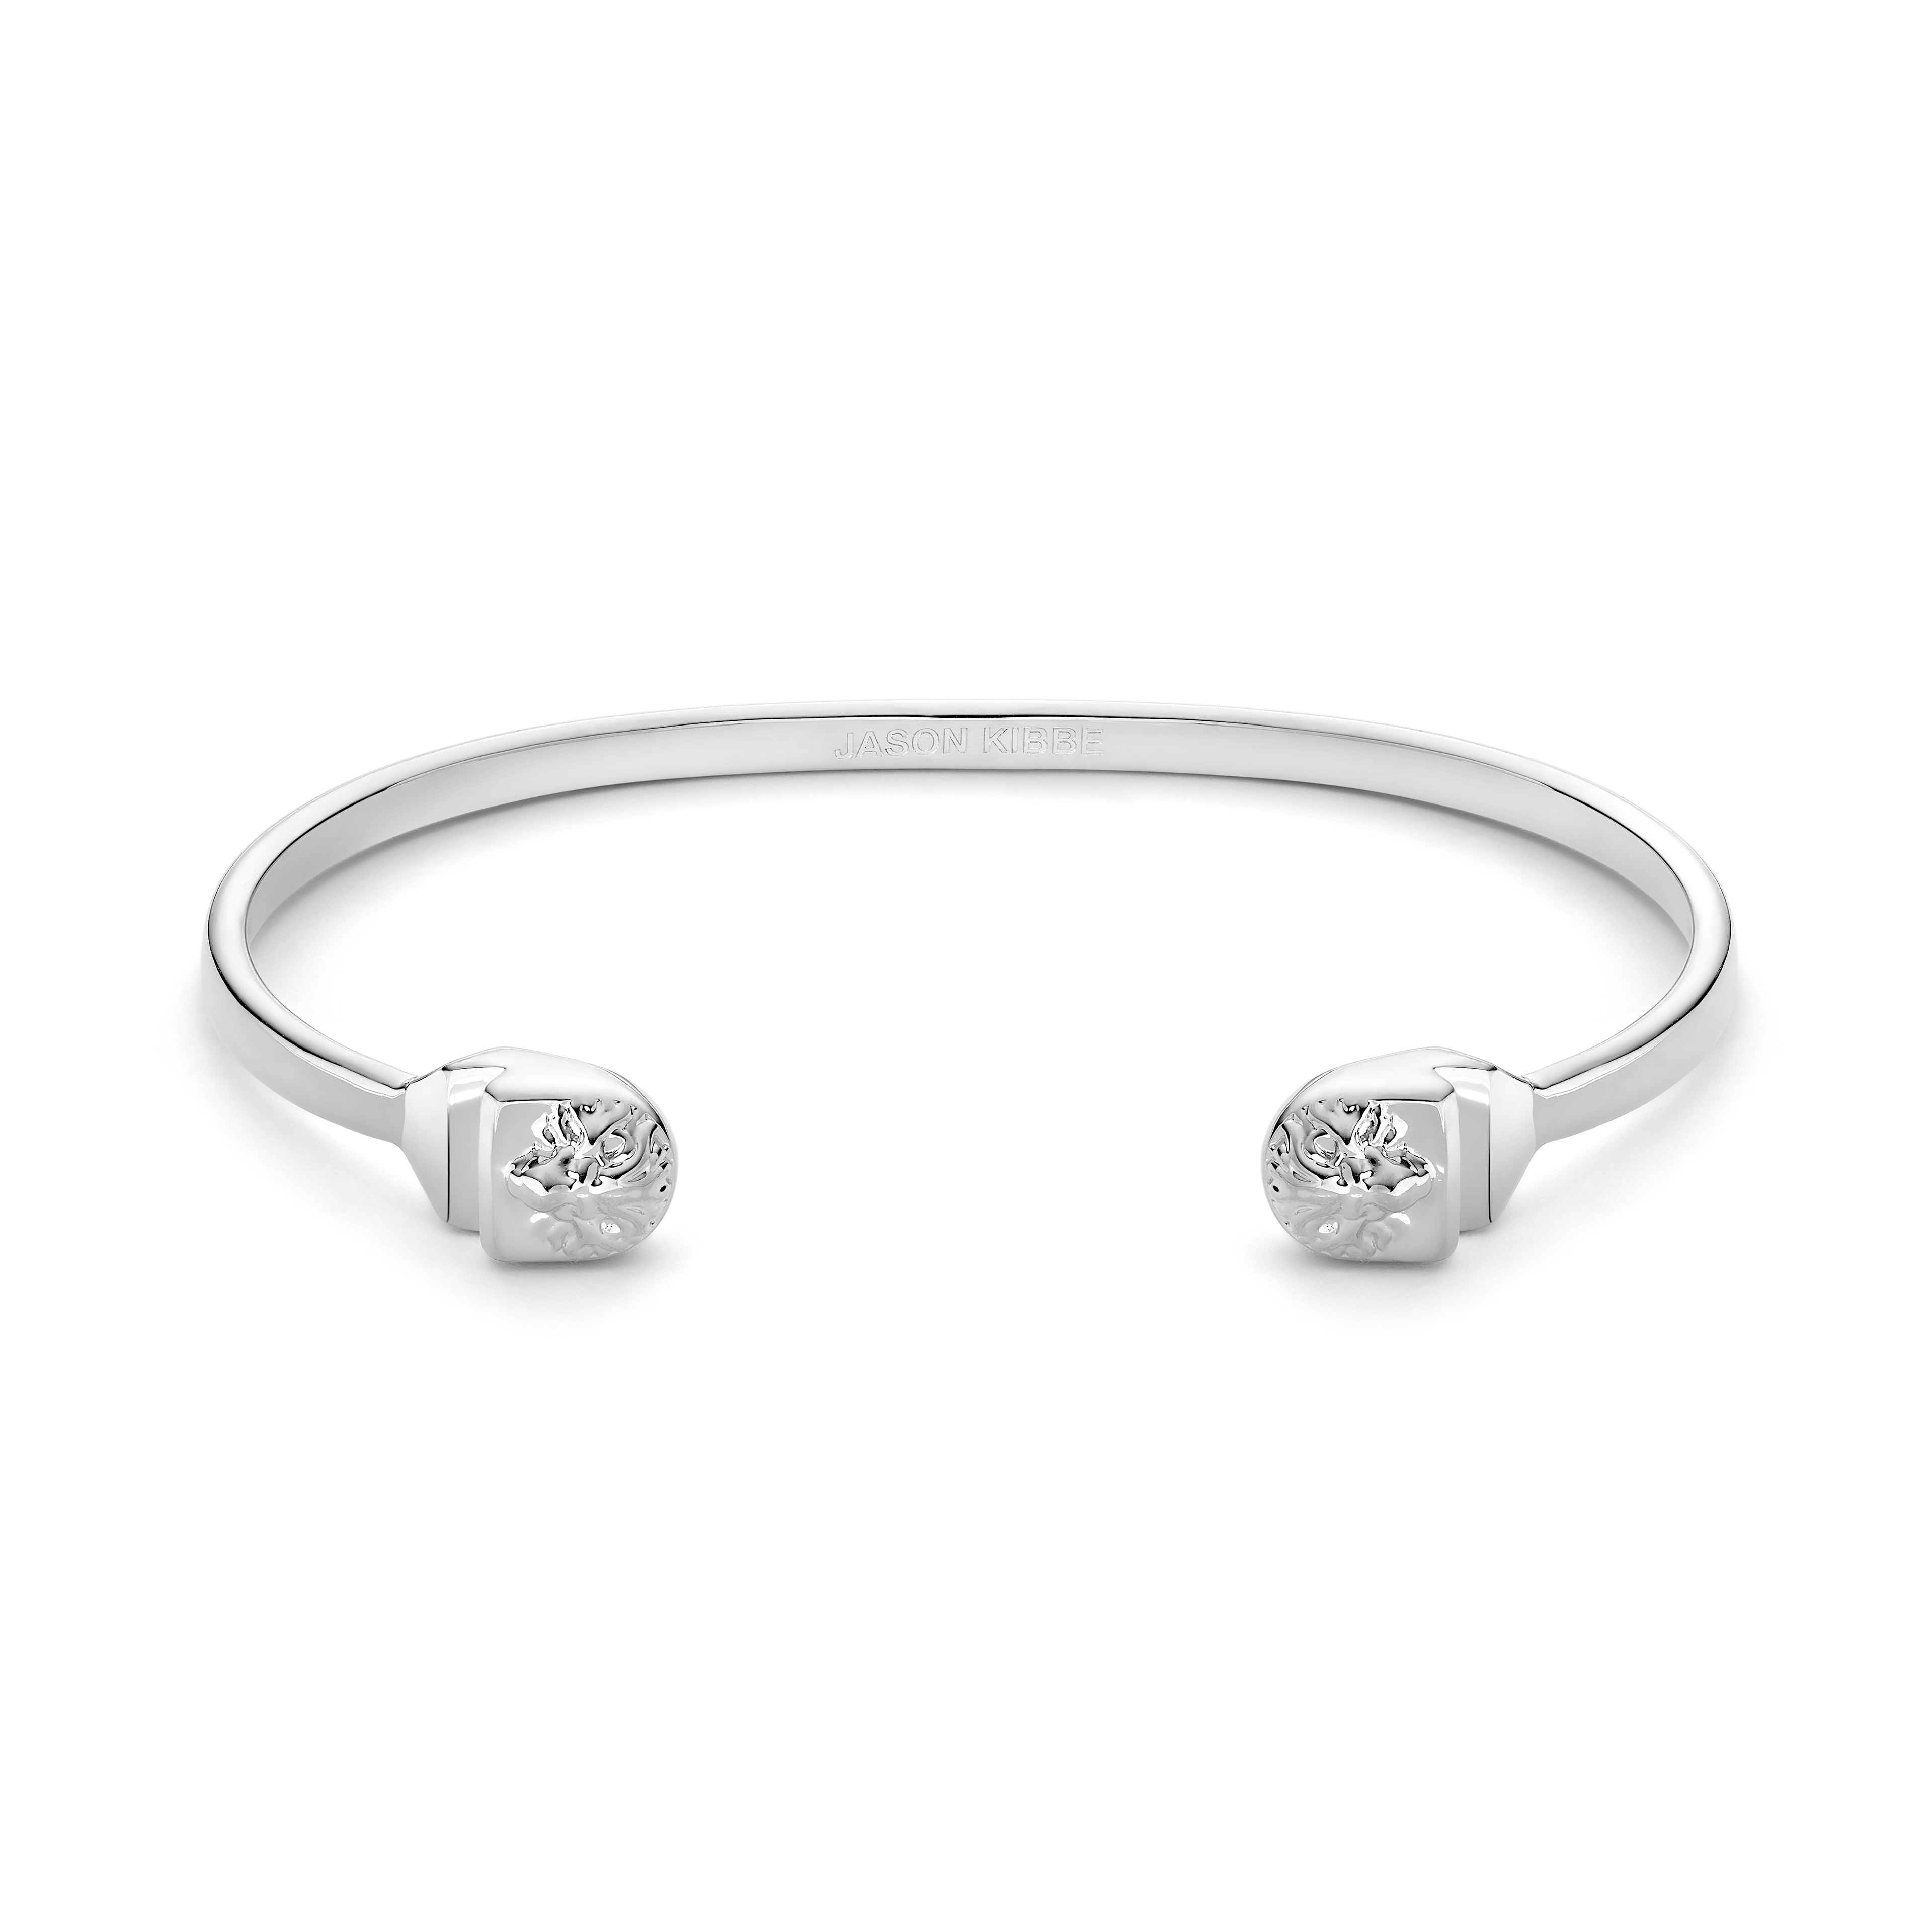 Buy Lion Bracelet in Sterling Silver 925 With Perforated Sides. Online in  India - Etsy